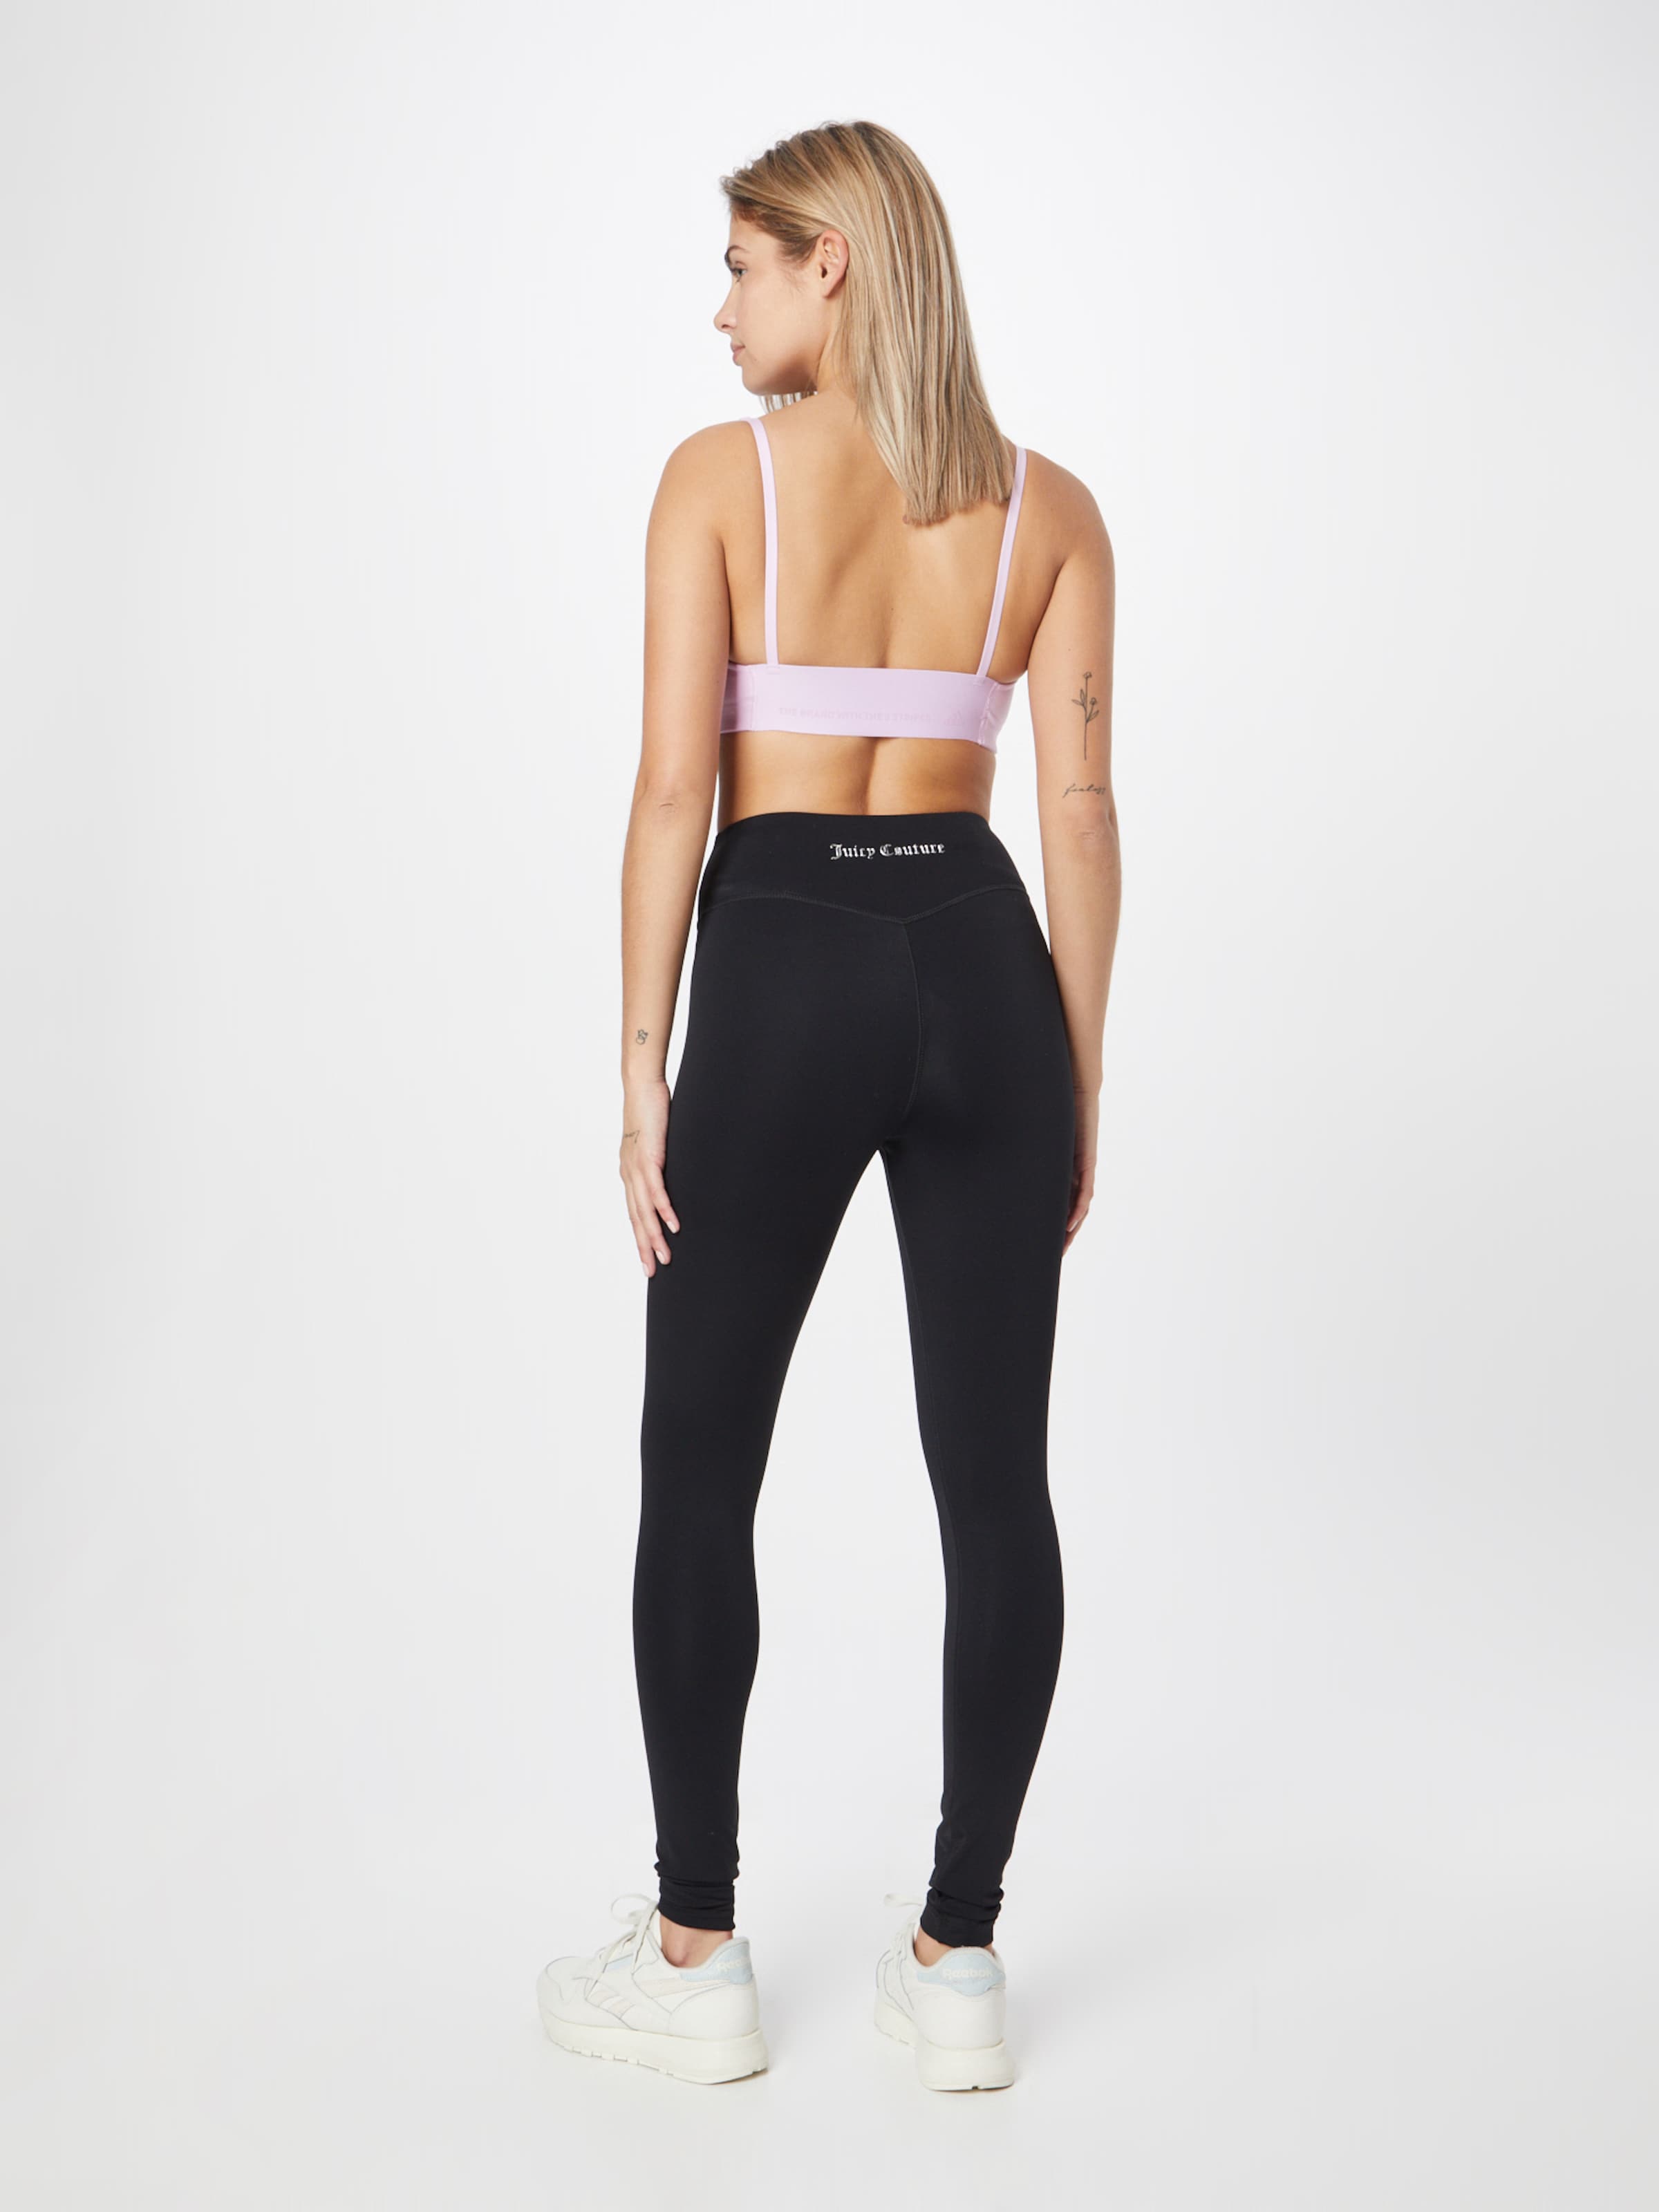 Juicy Couture Sport Skinny Workout Pants in Black